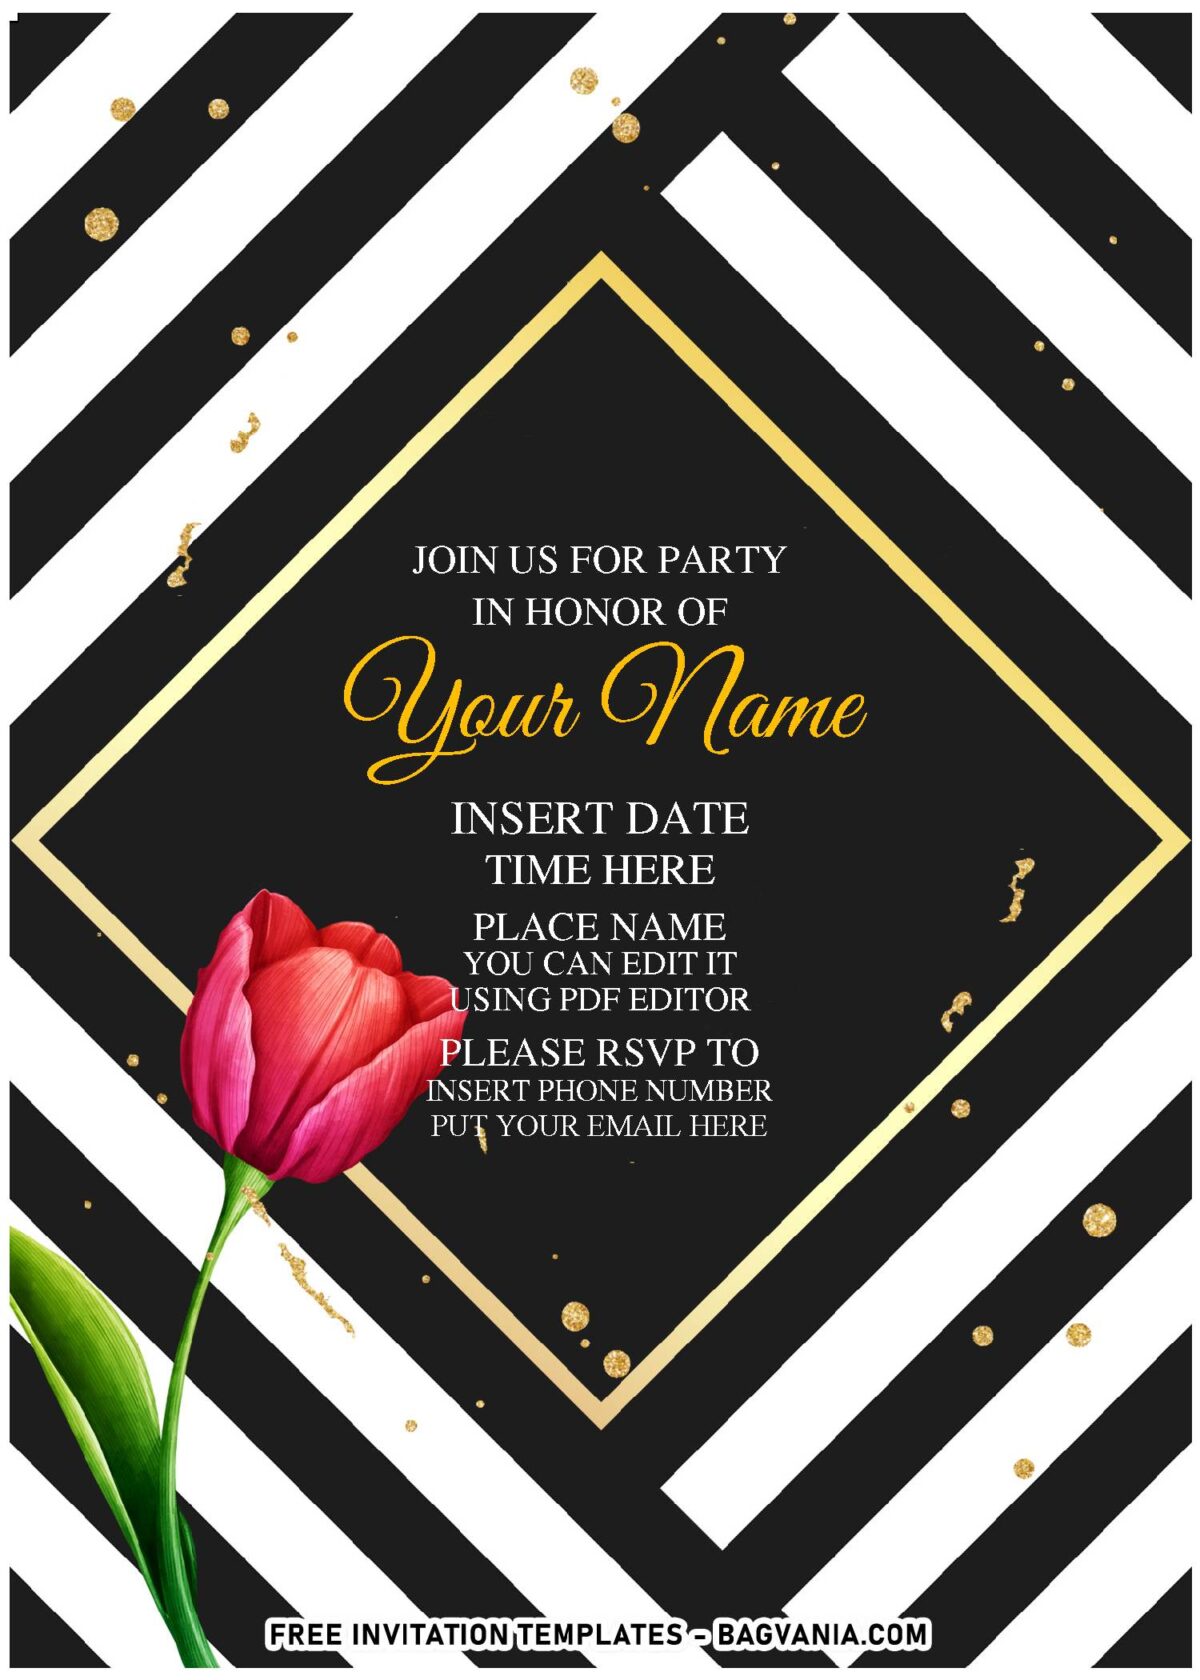 (Free Editable PDF) Classic Palette Black And White Floral Invitation Templates with patterned black and white background